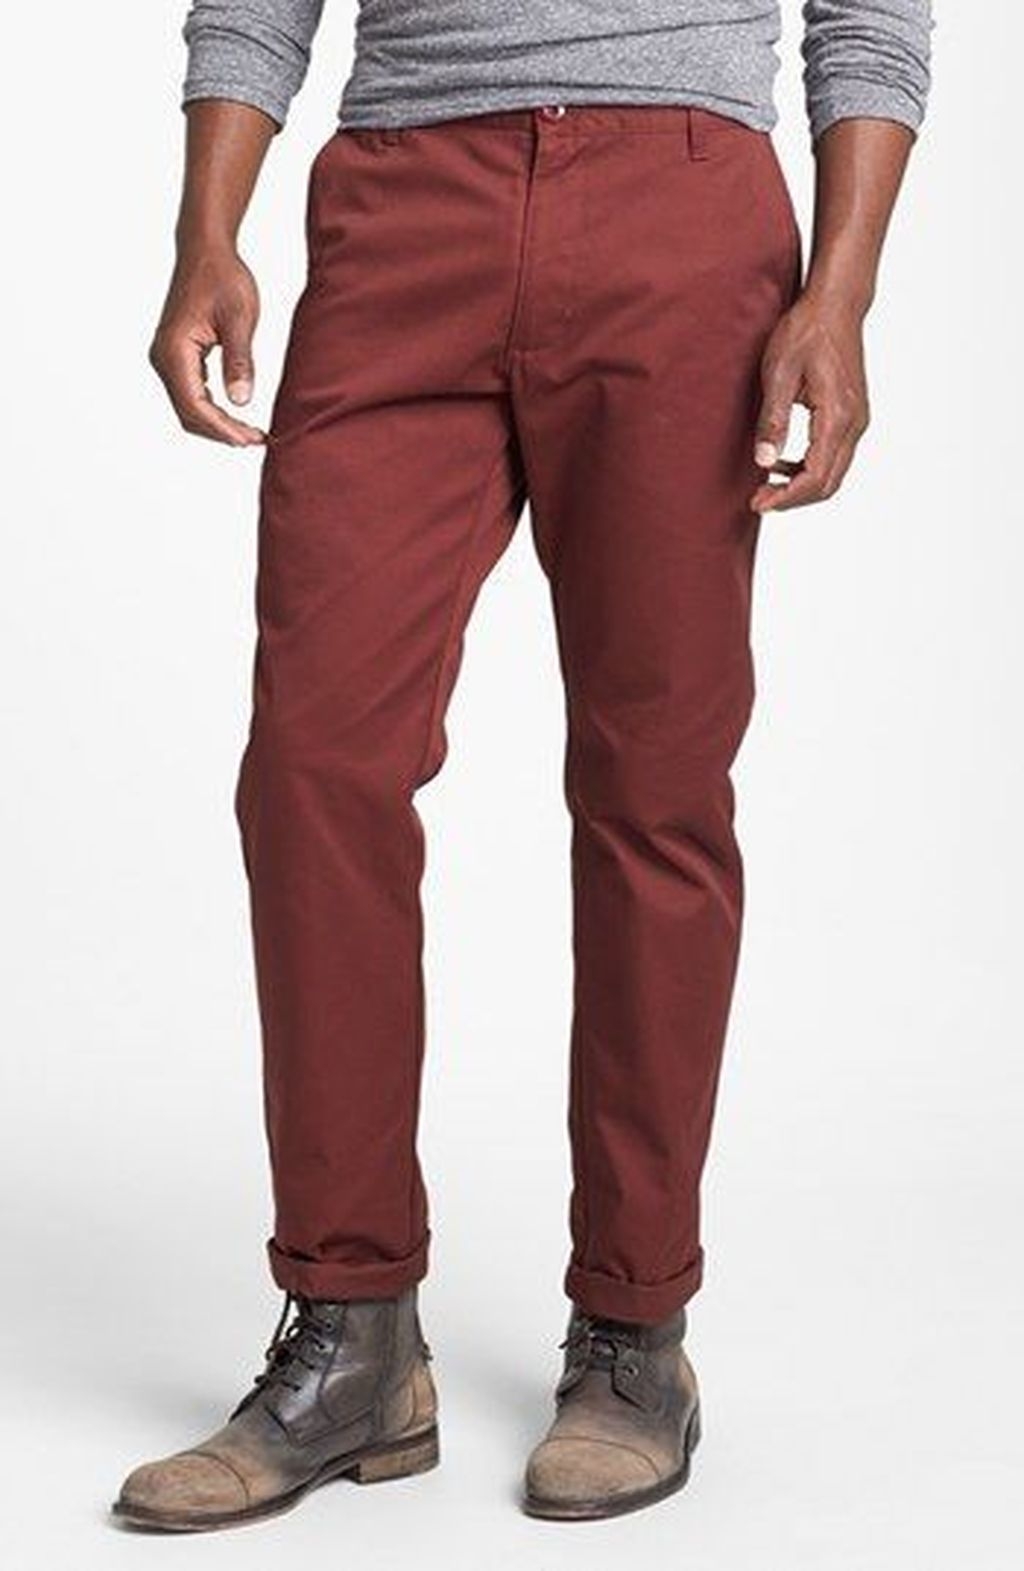 41 Outstanding Mens Chinos Outfit Ideas For Casual Style - ADDICFASHION